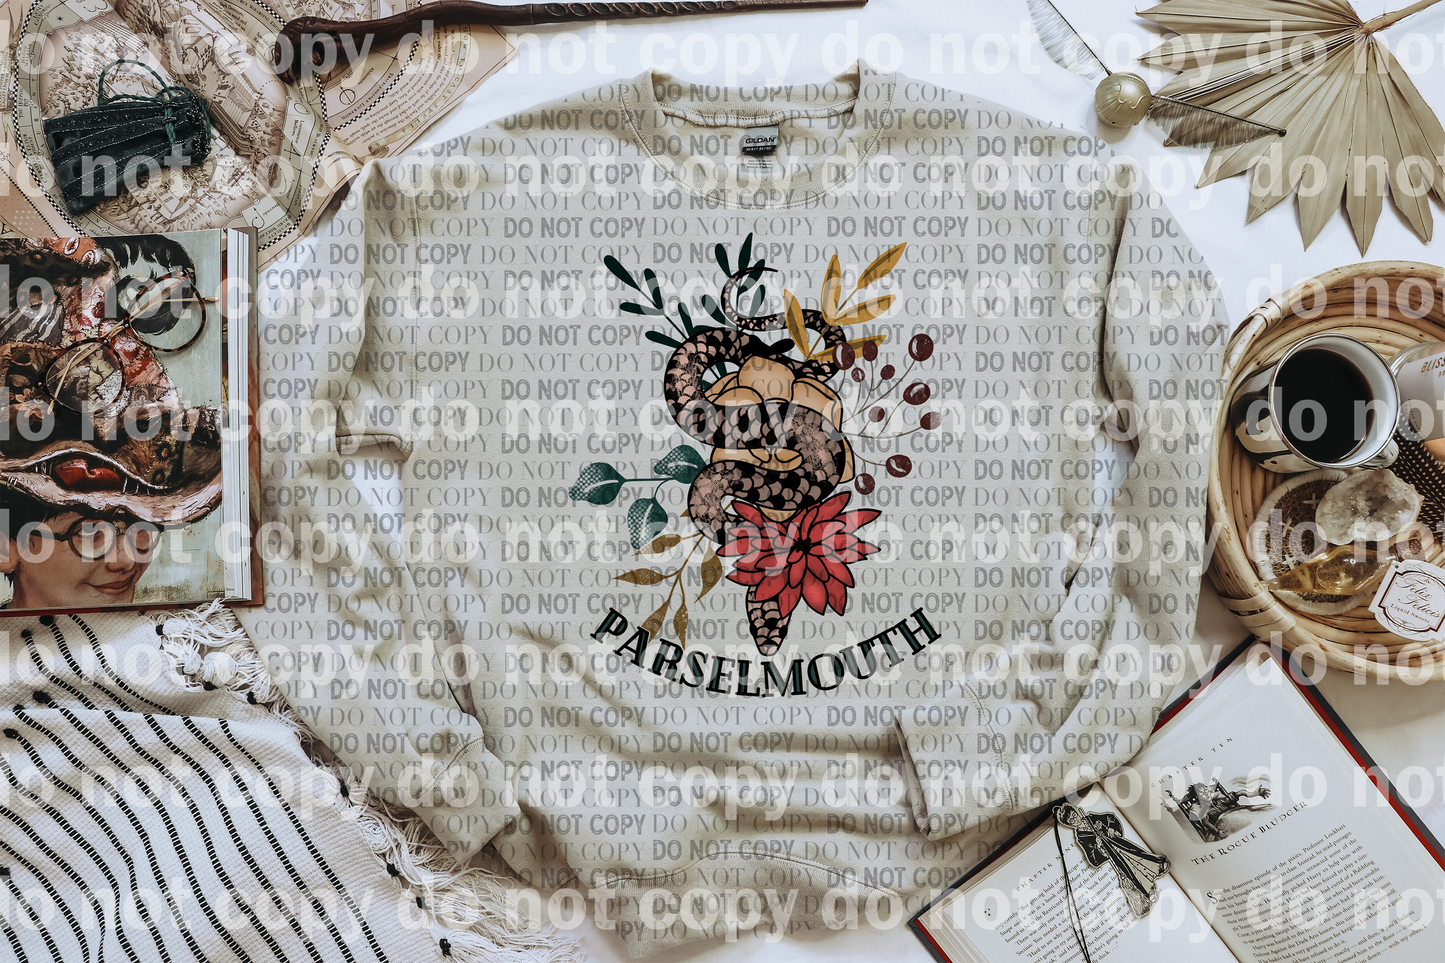 Parselmouth Typography Full Color/One Color Dream Print or Sublimation Print